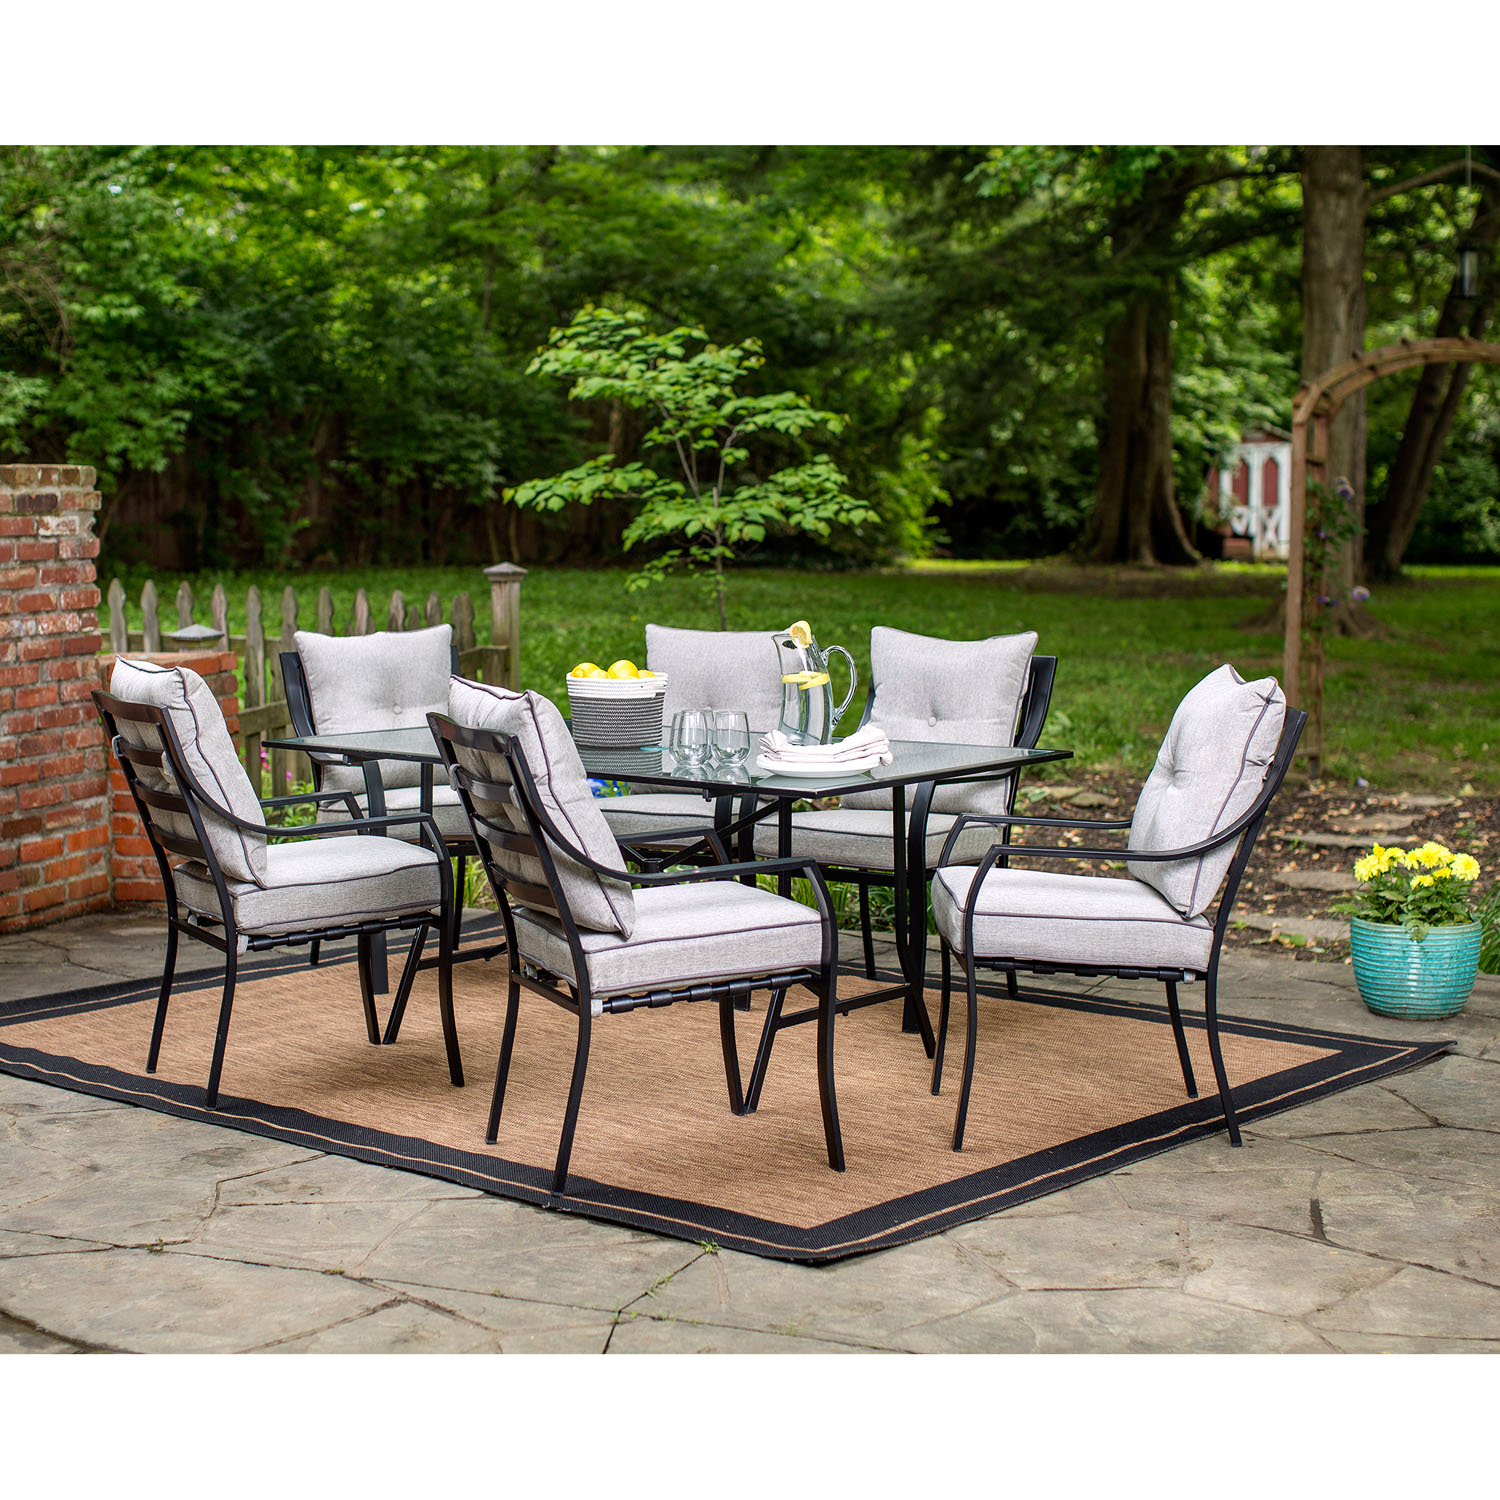 Hanover Lavallette 7-Piece Outdoor Dining Set with Rust Resistant, Heavy-duty Steel